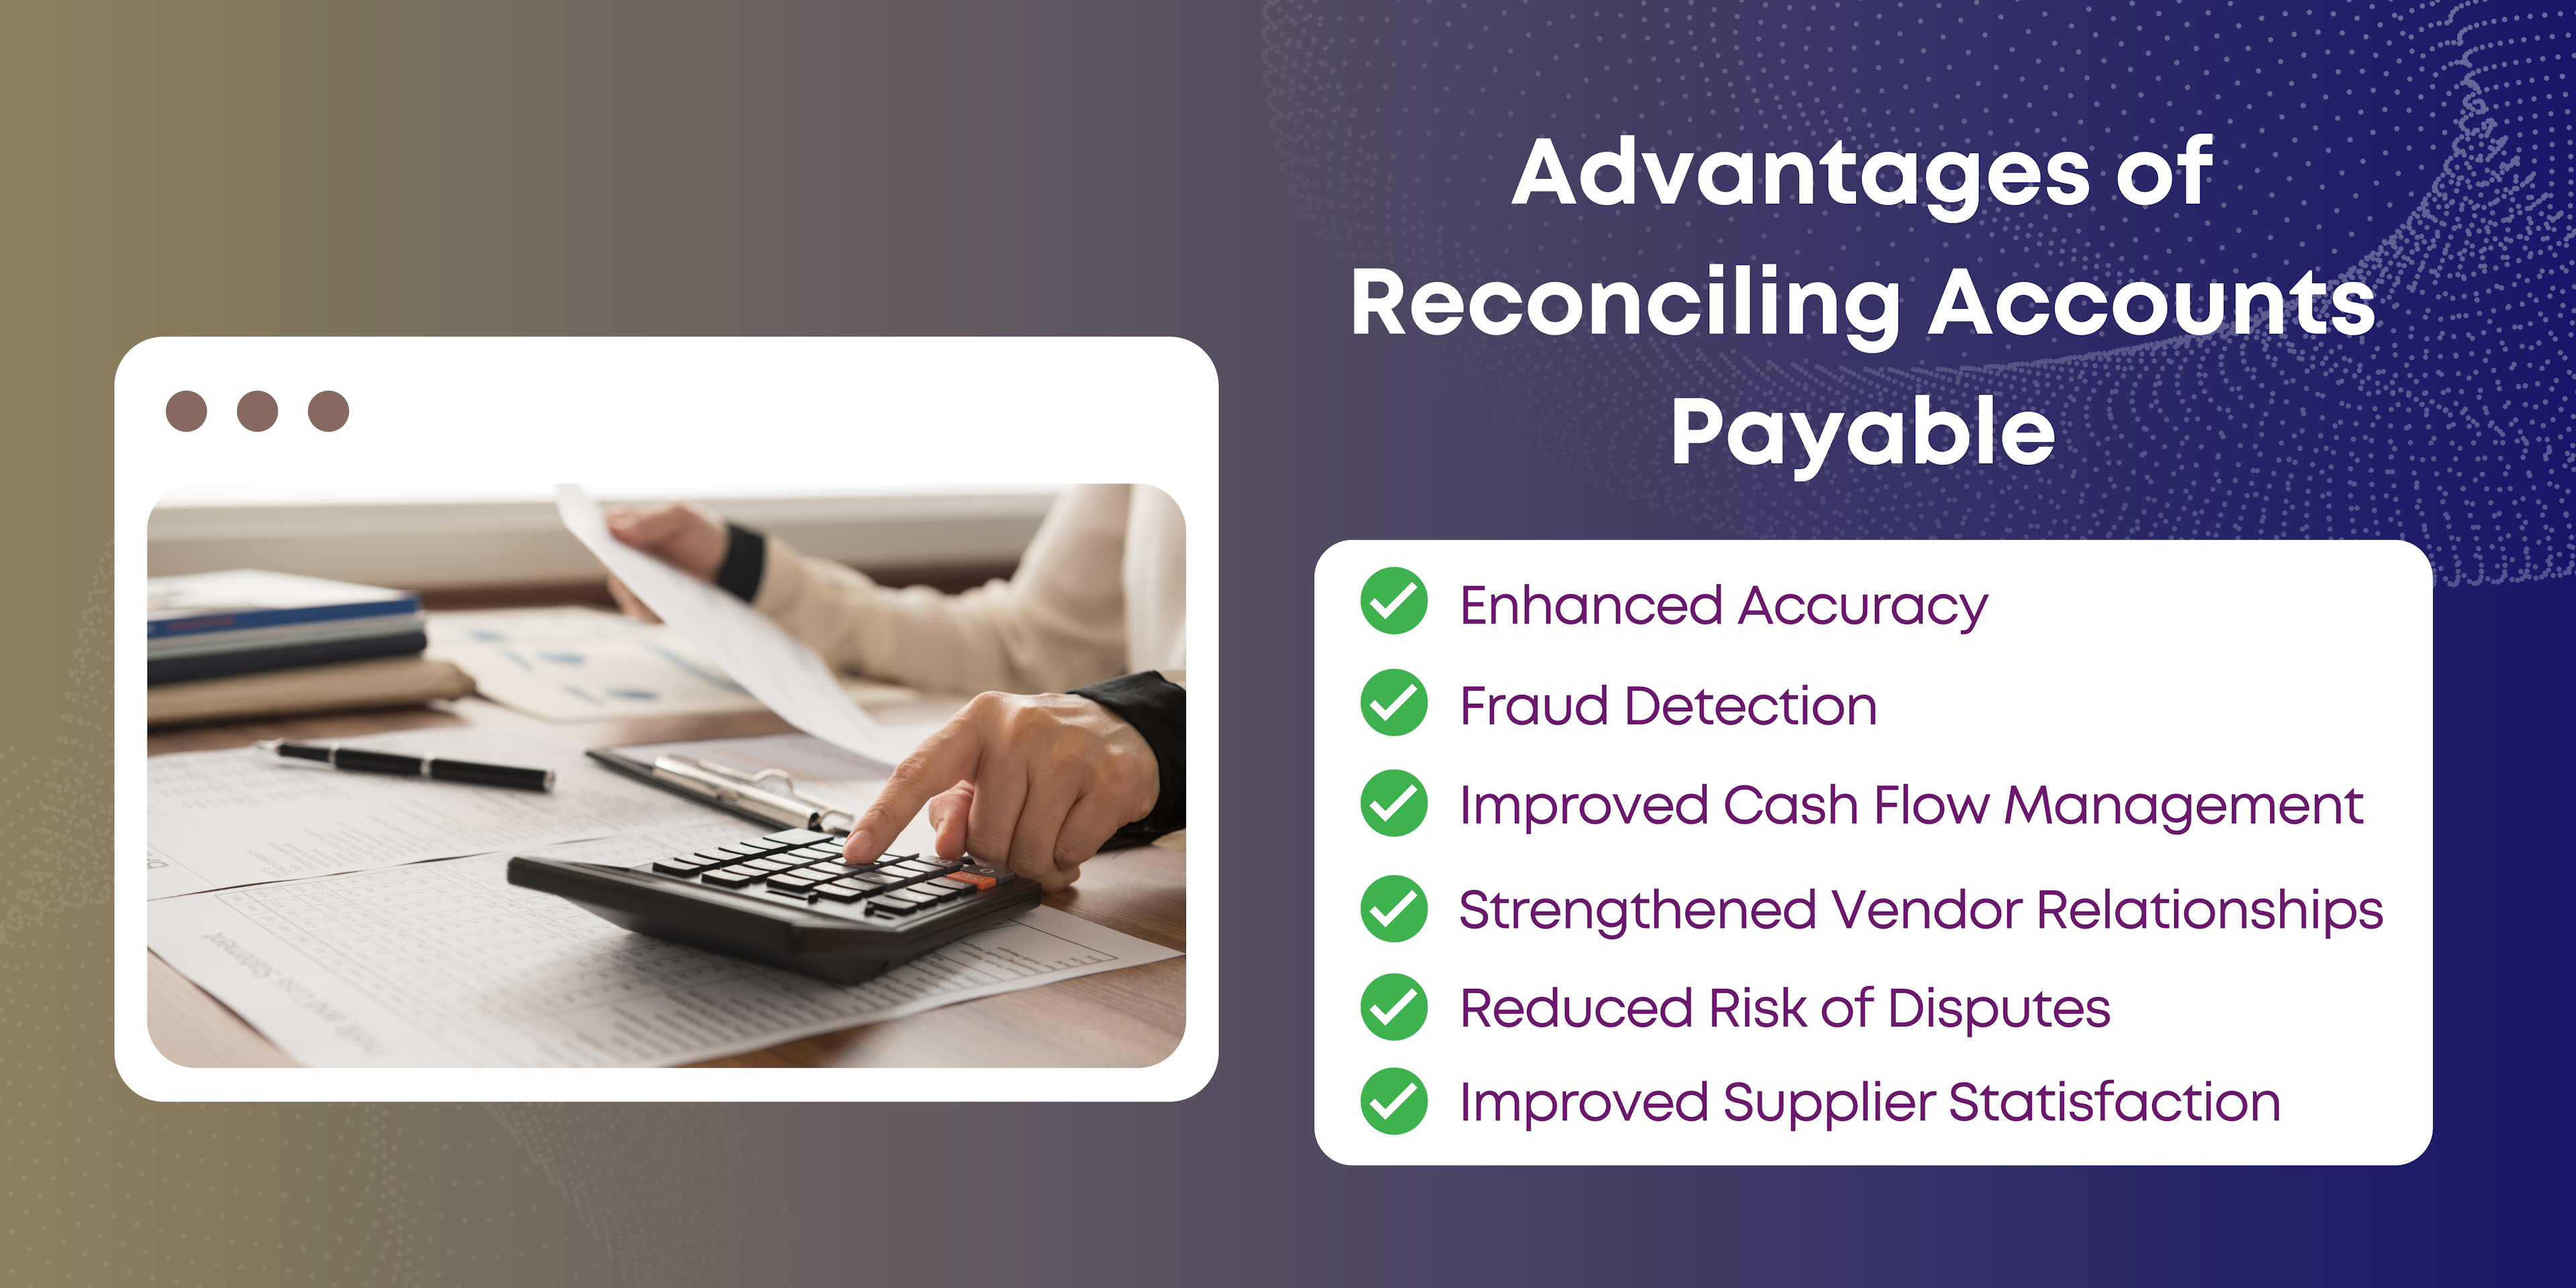 Advantages of Reconciling Accounts Payable